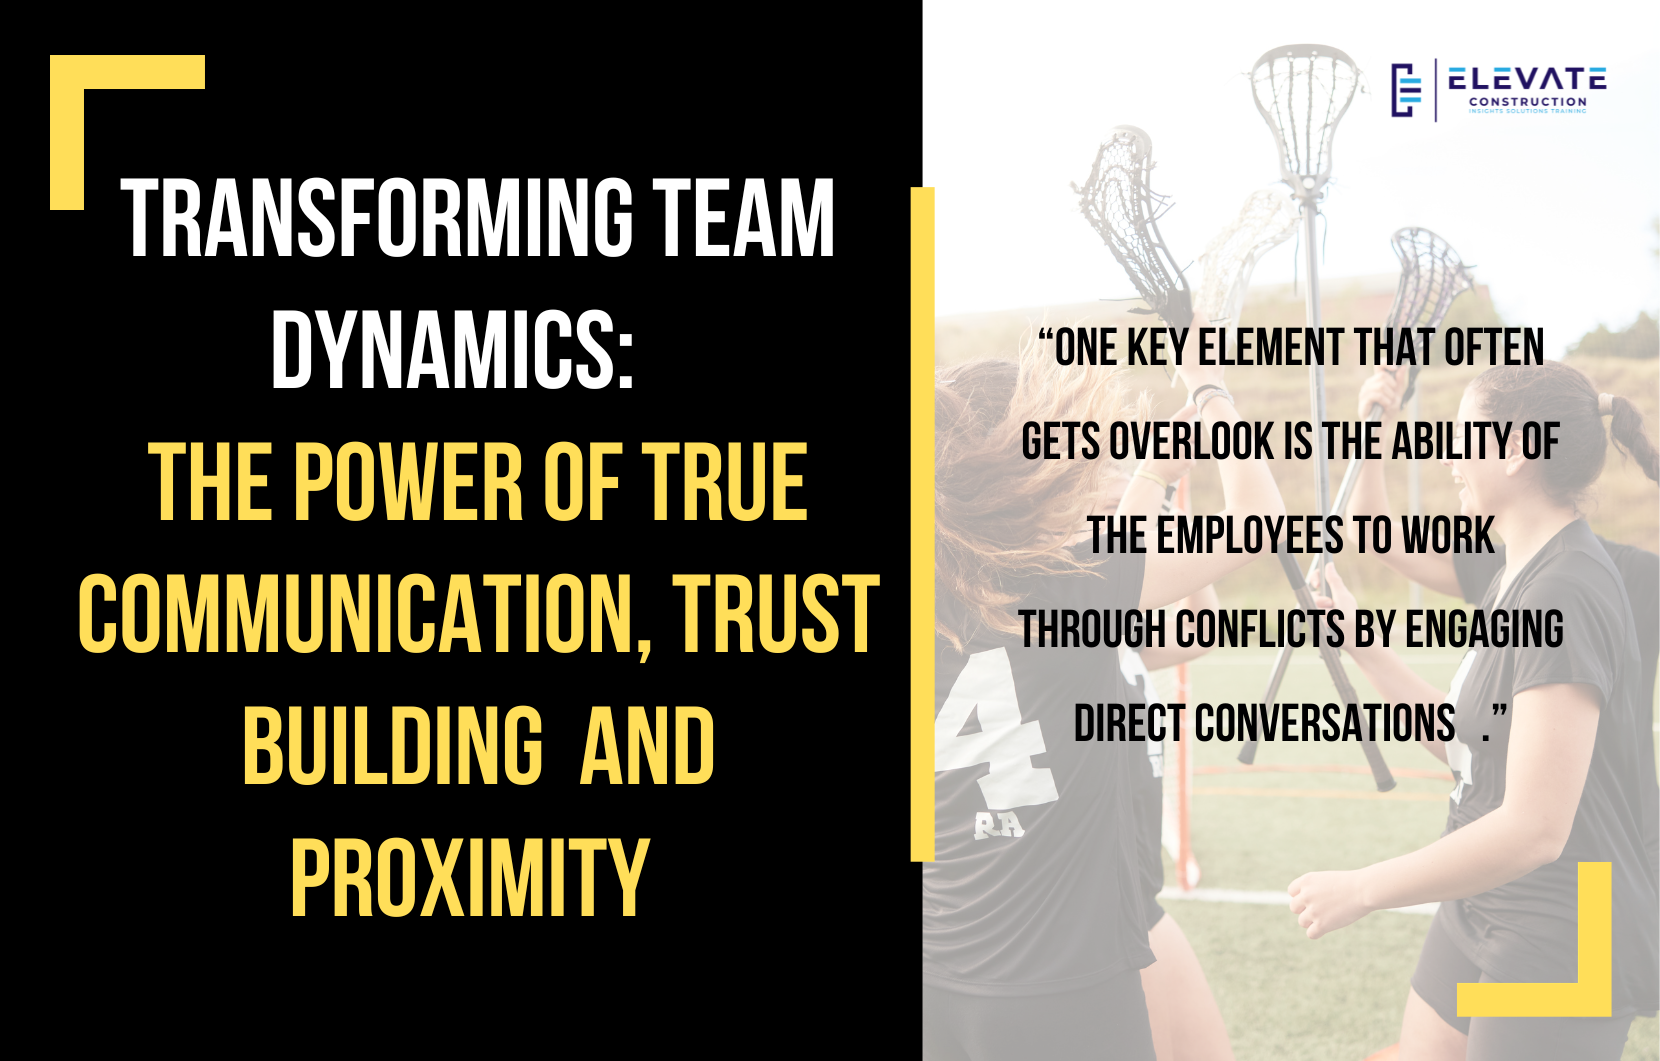 Transforming Team Dynamics: The Power of Direct Communication, Trust Building, and Proximity